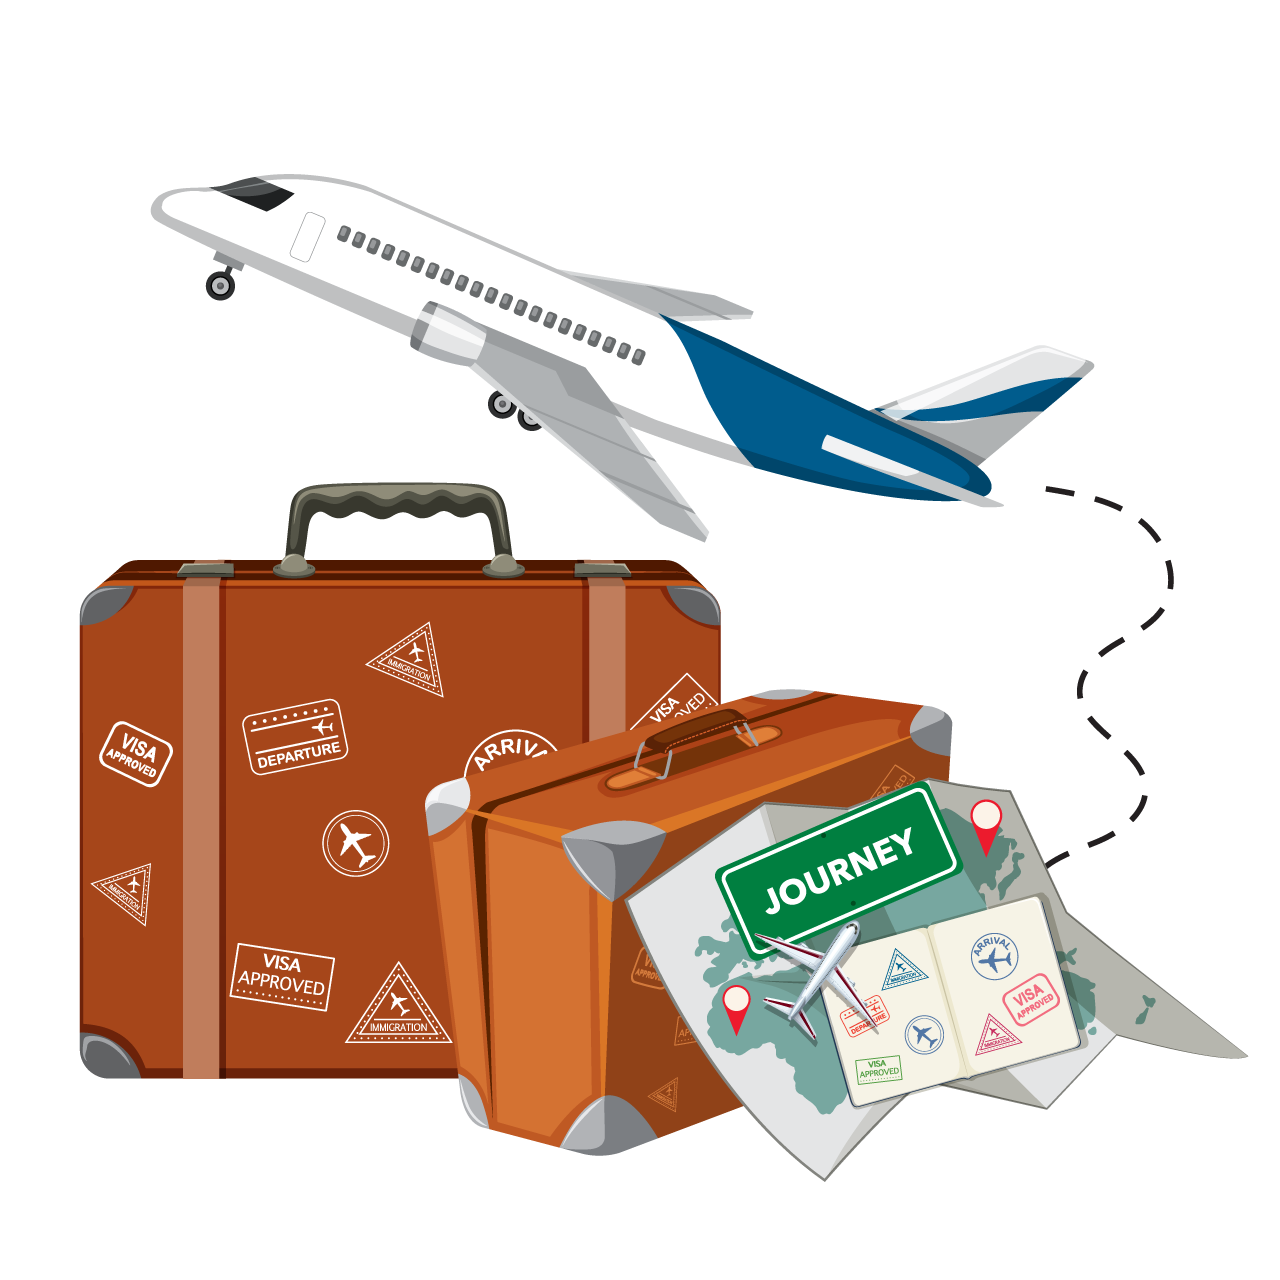 Travelling objects with aeroplane white background